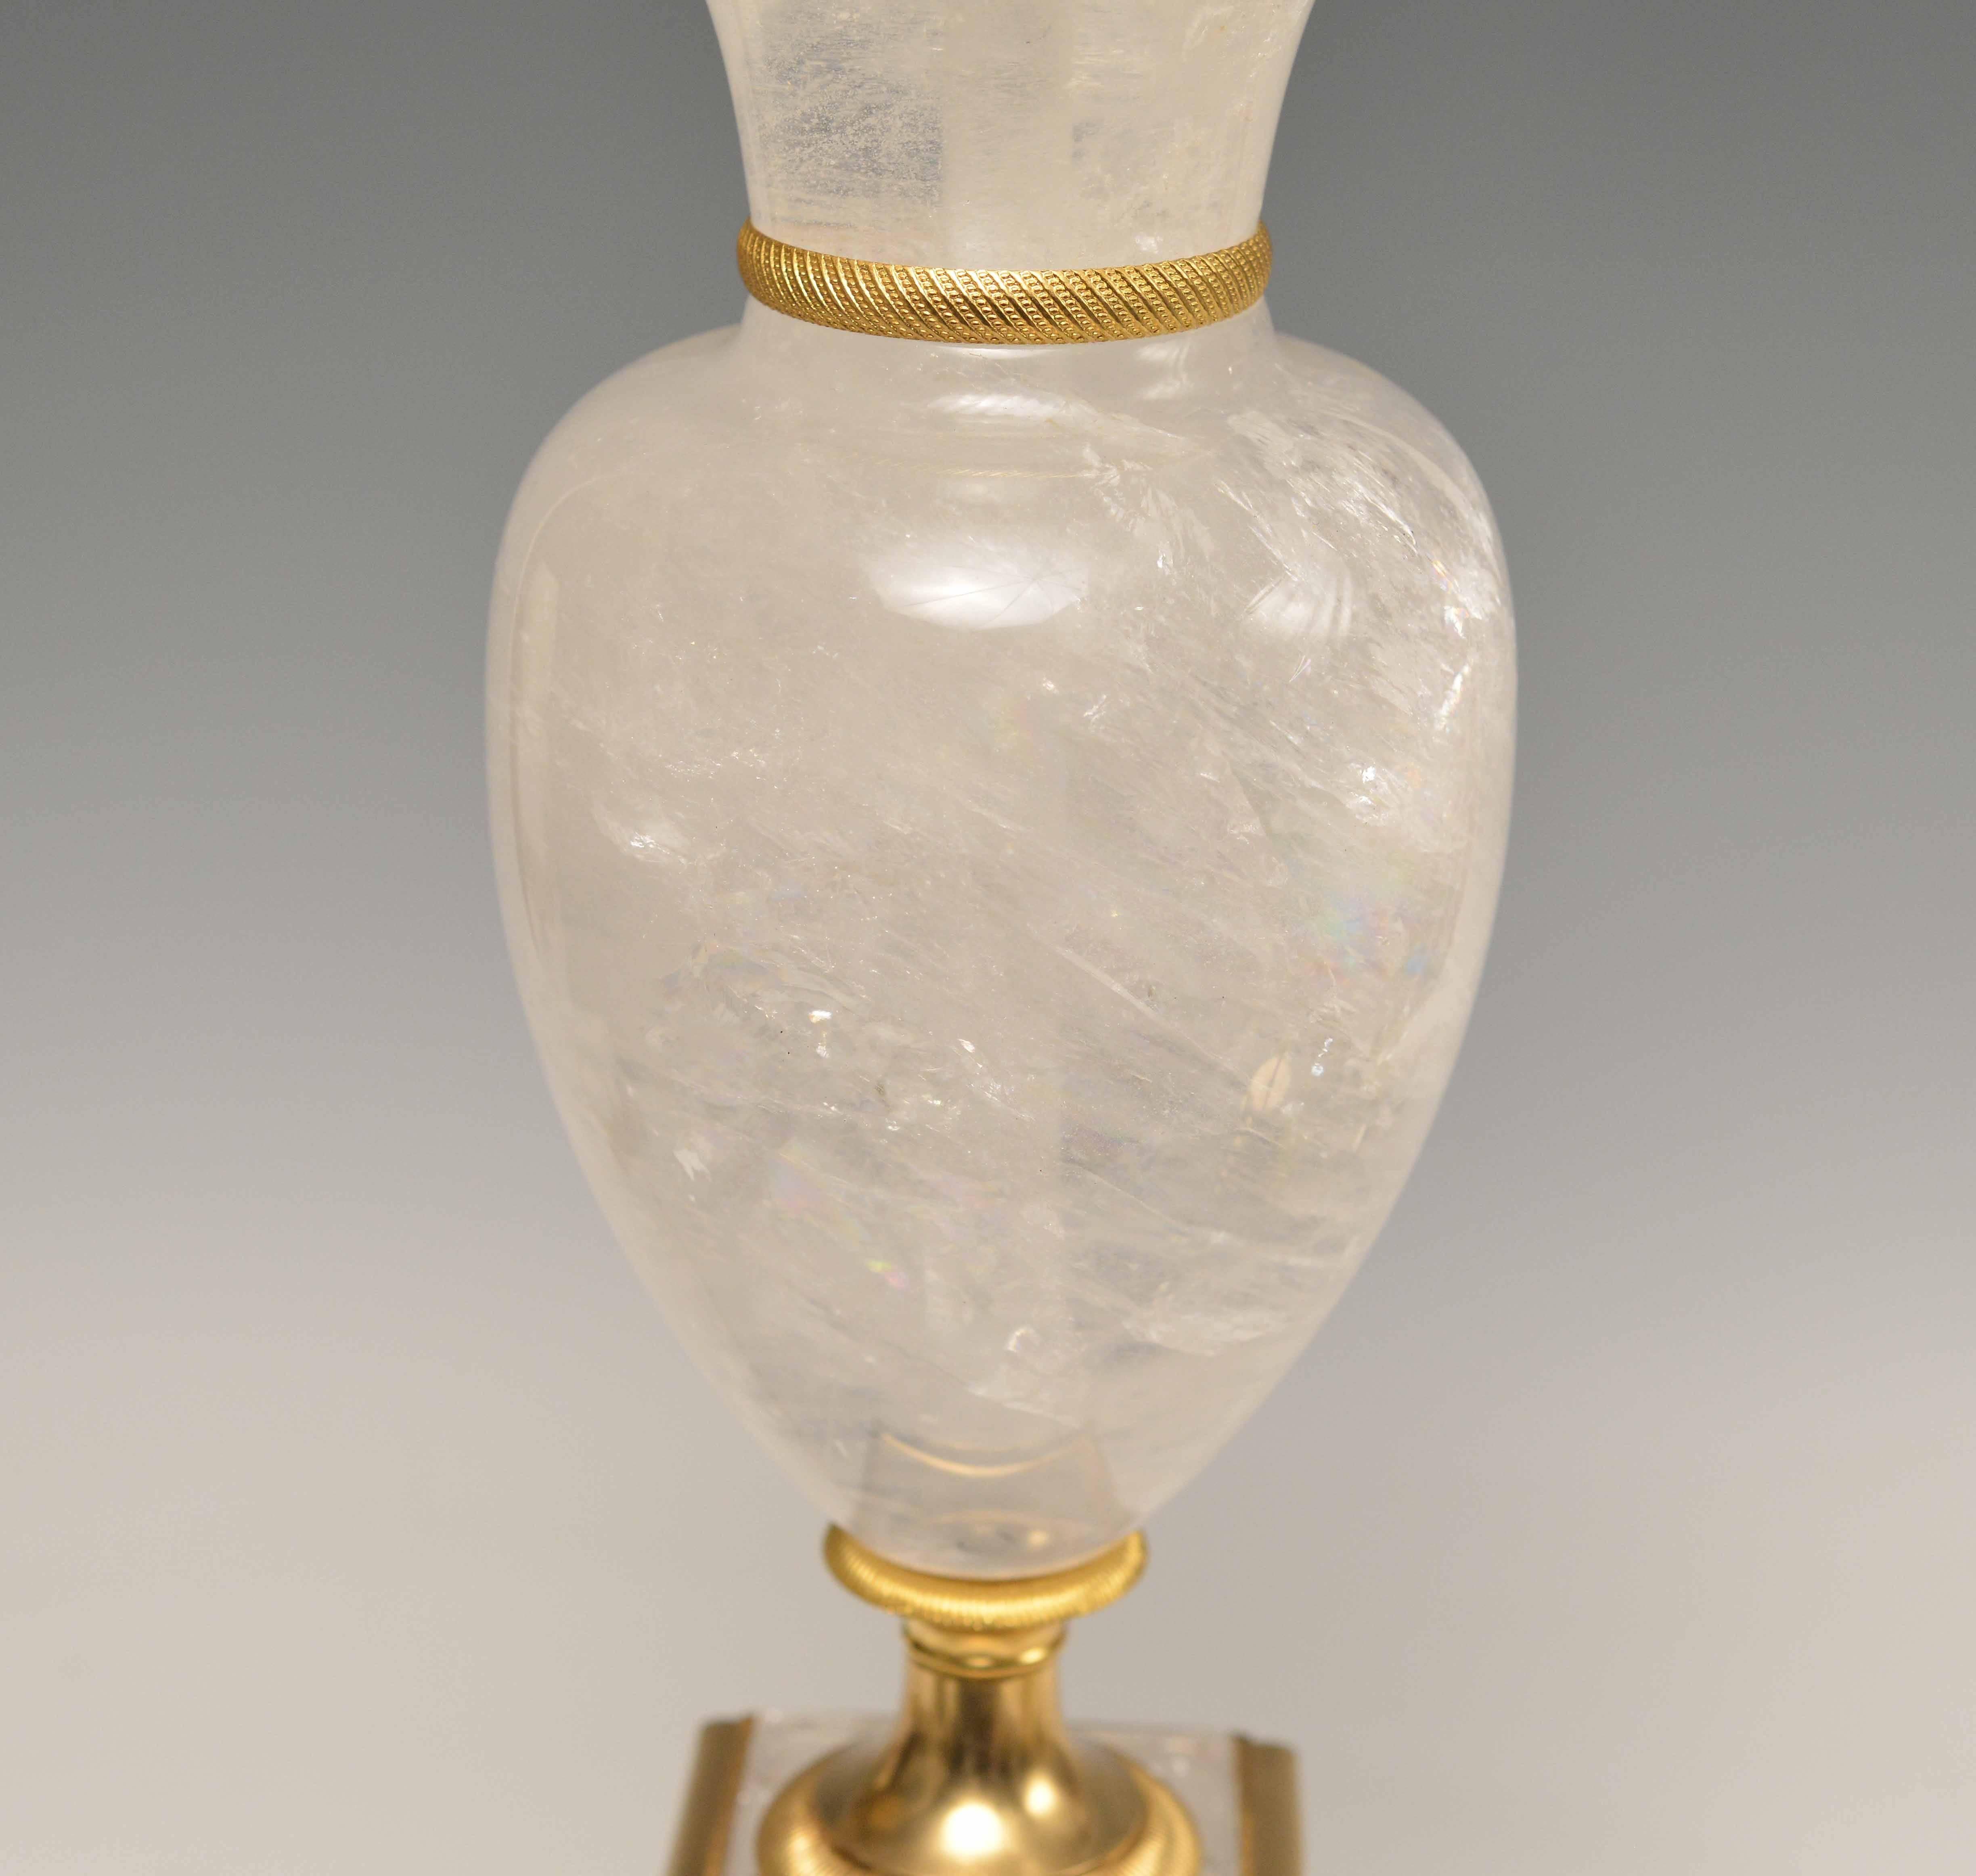 A fine cast polish bronze with carved vase form rock crystal quartz lamp, created by Phoenix Gallery, NYC.
Available in nickel plating and antique brass finished. 
To the rock crystal: 20 inch.
(Lampshade not included)